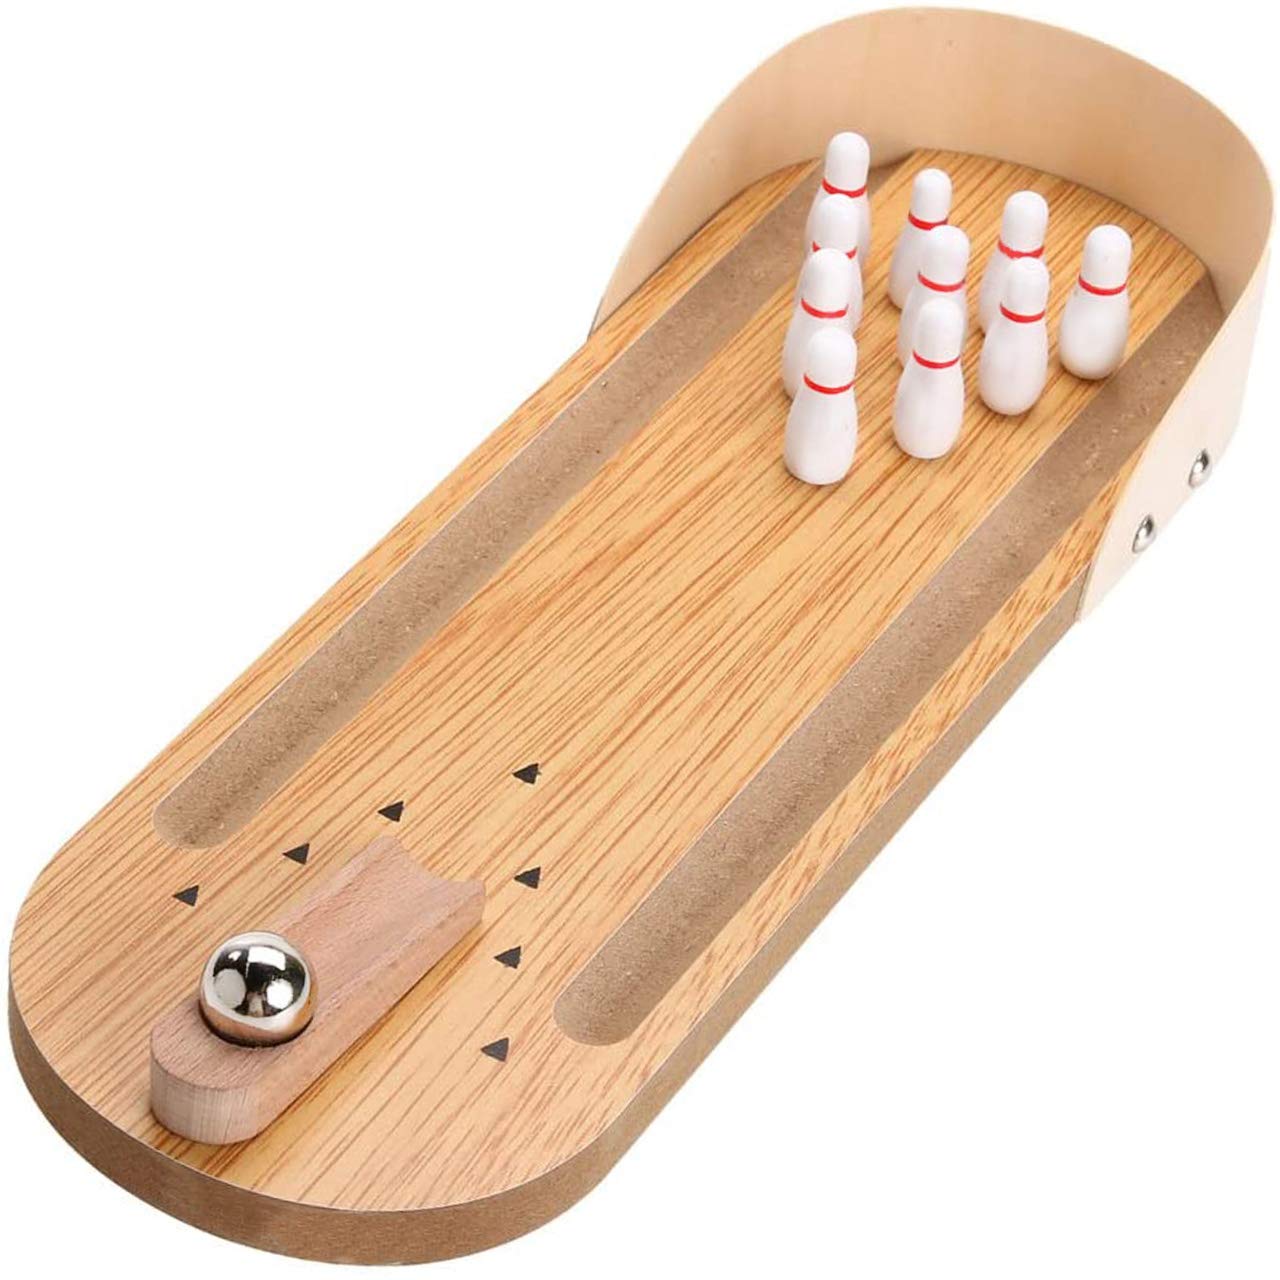 Mini Bowling Set Tabletop Bowling Game - Coffee Table Top Bowling Gifts for Men Bowlers Prizes - Desk Games Office Adults Wooden Desktop Bowling Stocking Stuffers for Kids Teens Boys Small Finger Toys